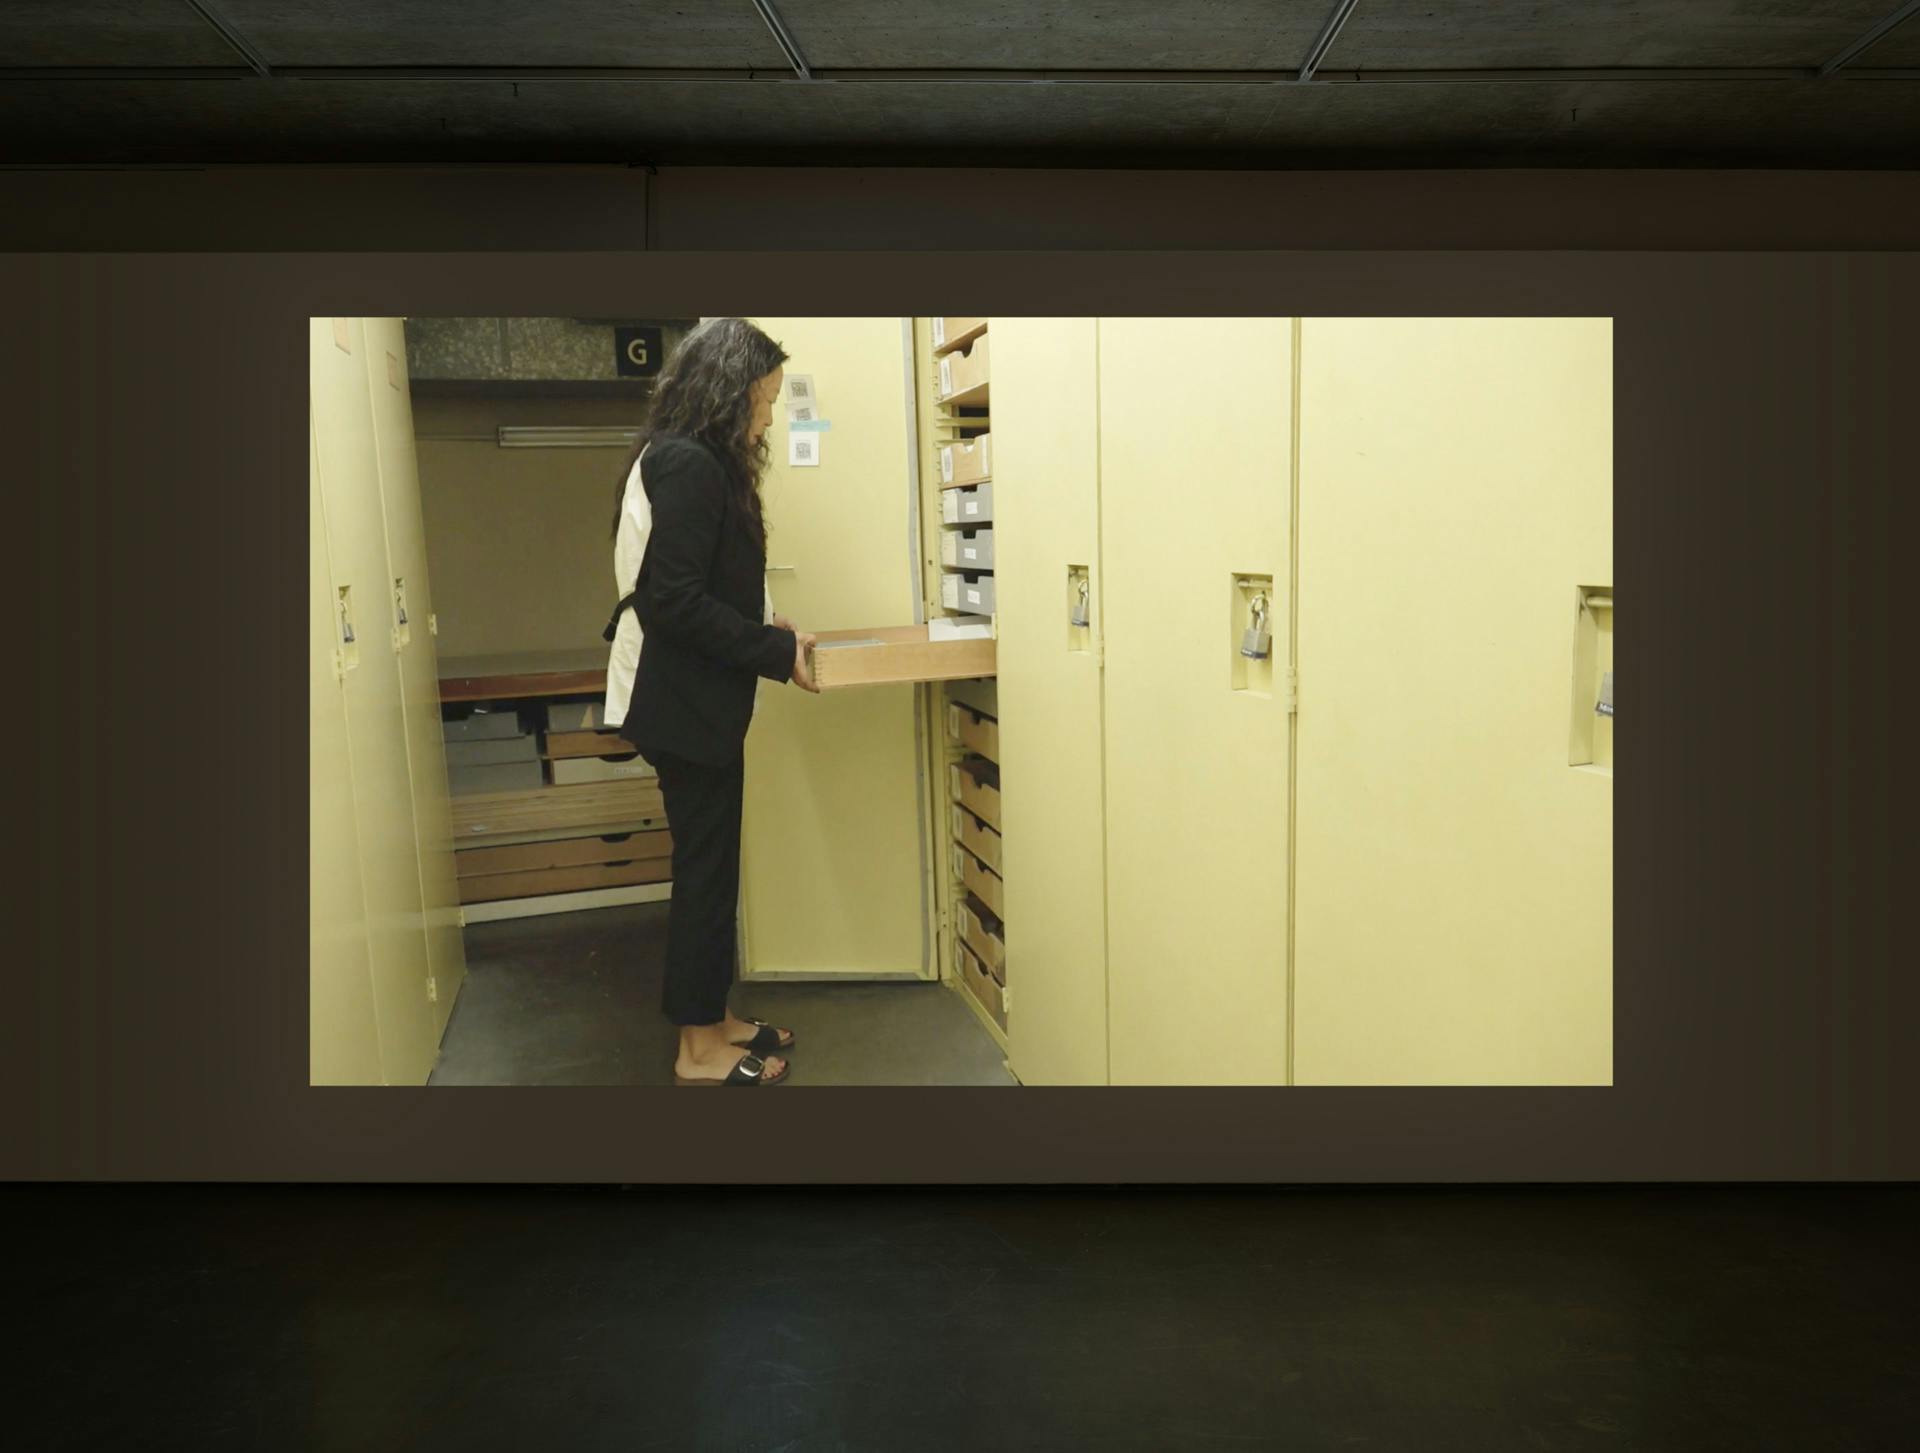 Video by Tanya Lukin Linklater projected on a wall in a dark room. Video depicts a woman opening a drawer inside an open storage locker surrounded by two rows of closed storage lockers.